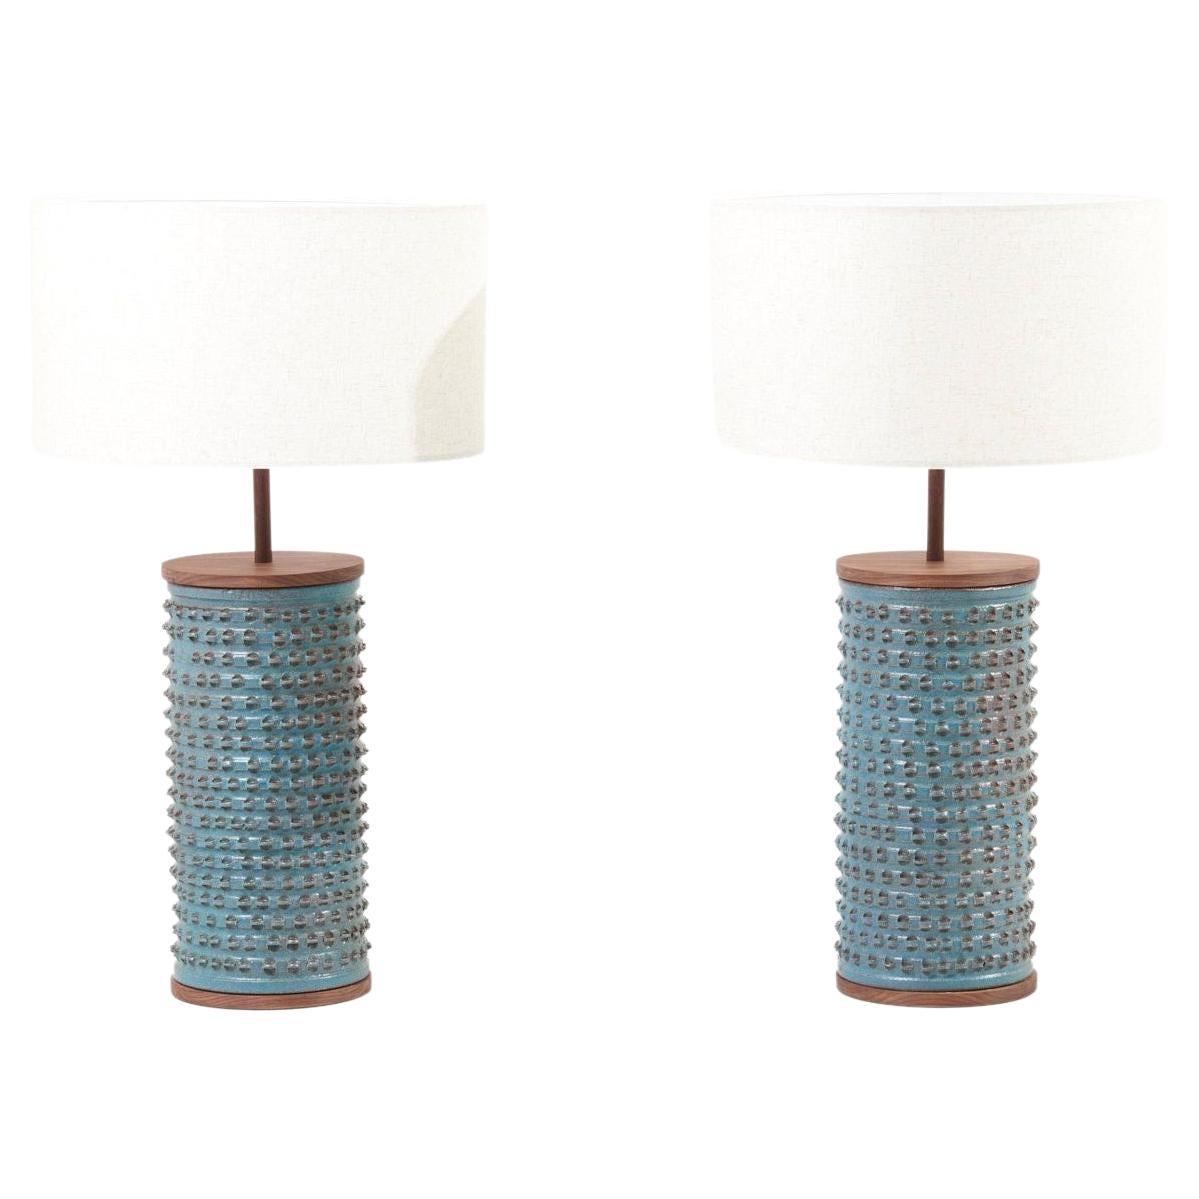 Pair of Brent Bennet Ceramic Table Lamps, USA, 2021